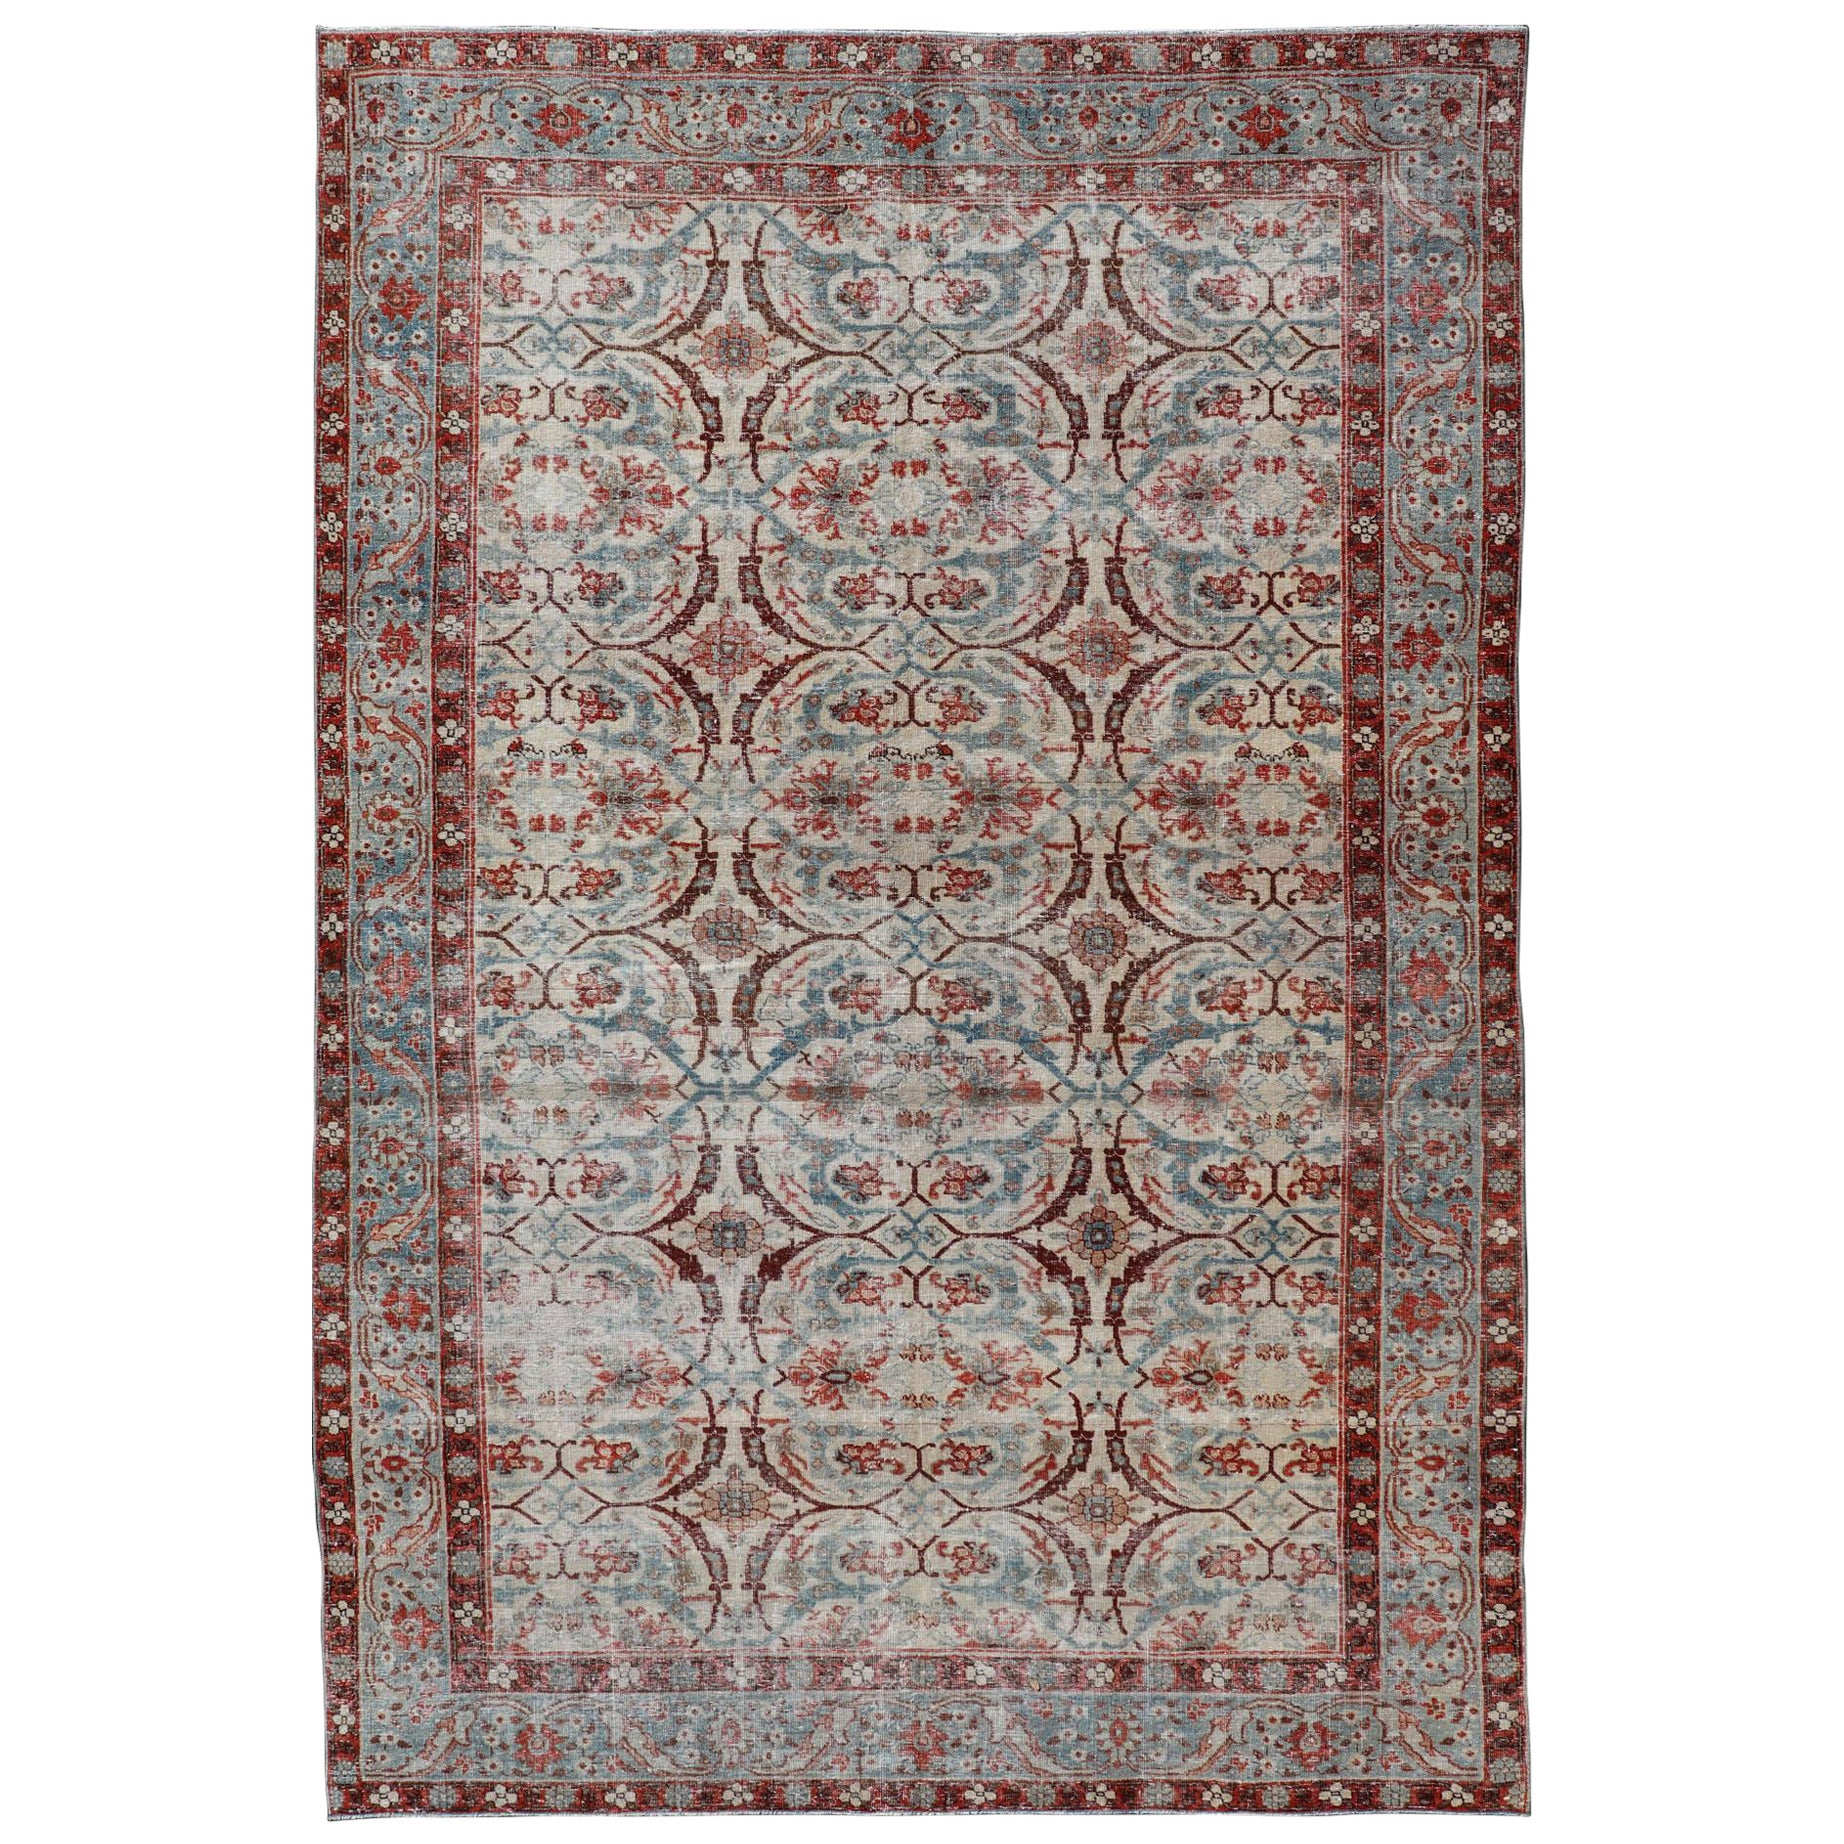 Antique Persian Tabriz Herati Circular Design in Ivory, Lt. Blue, Red, Brown For Sale